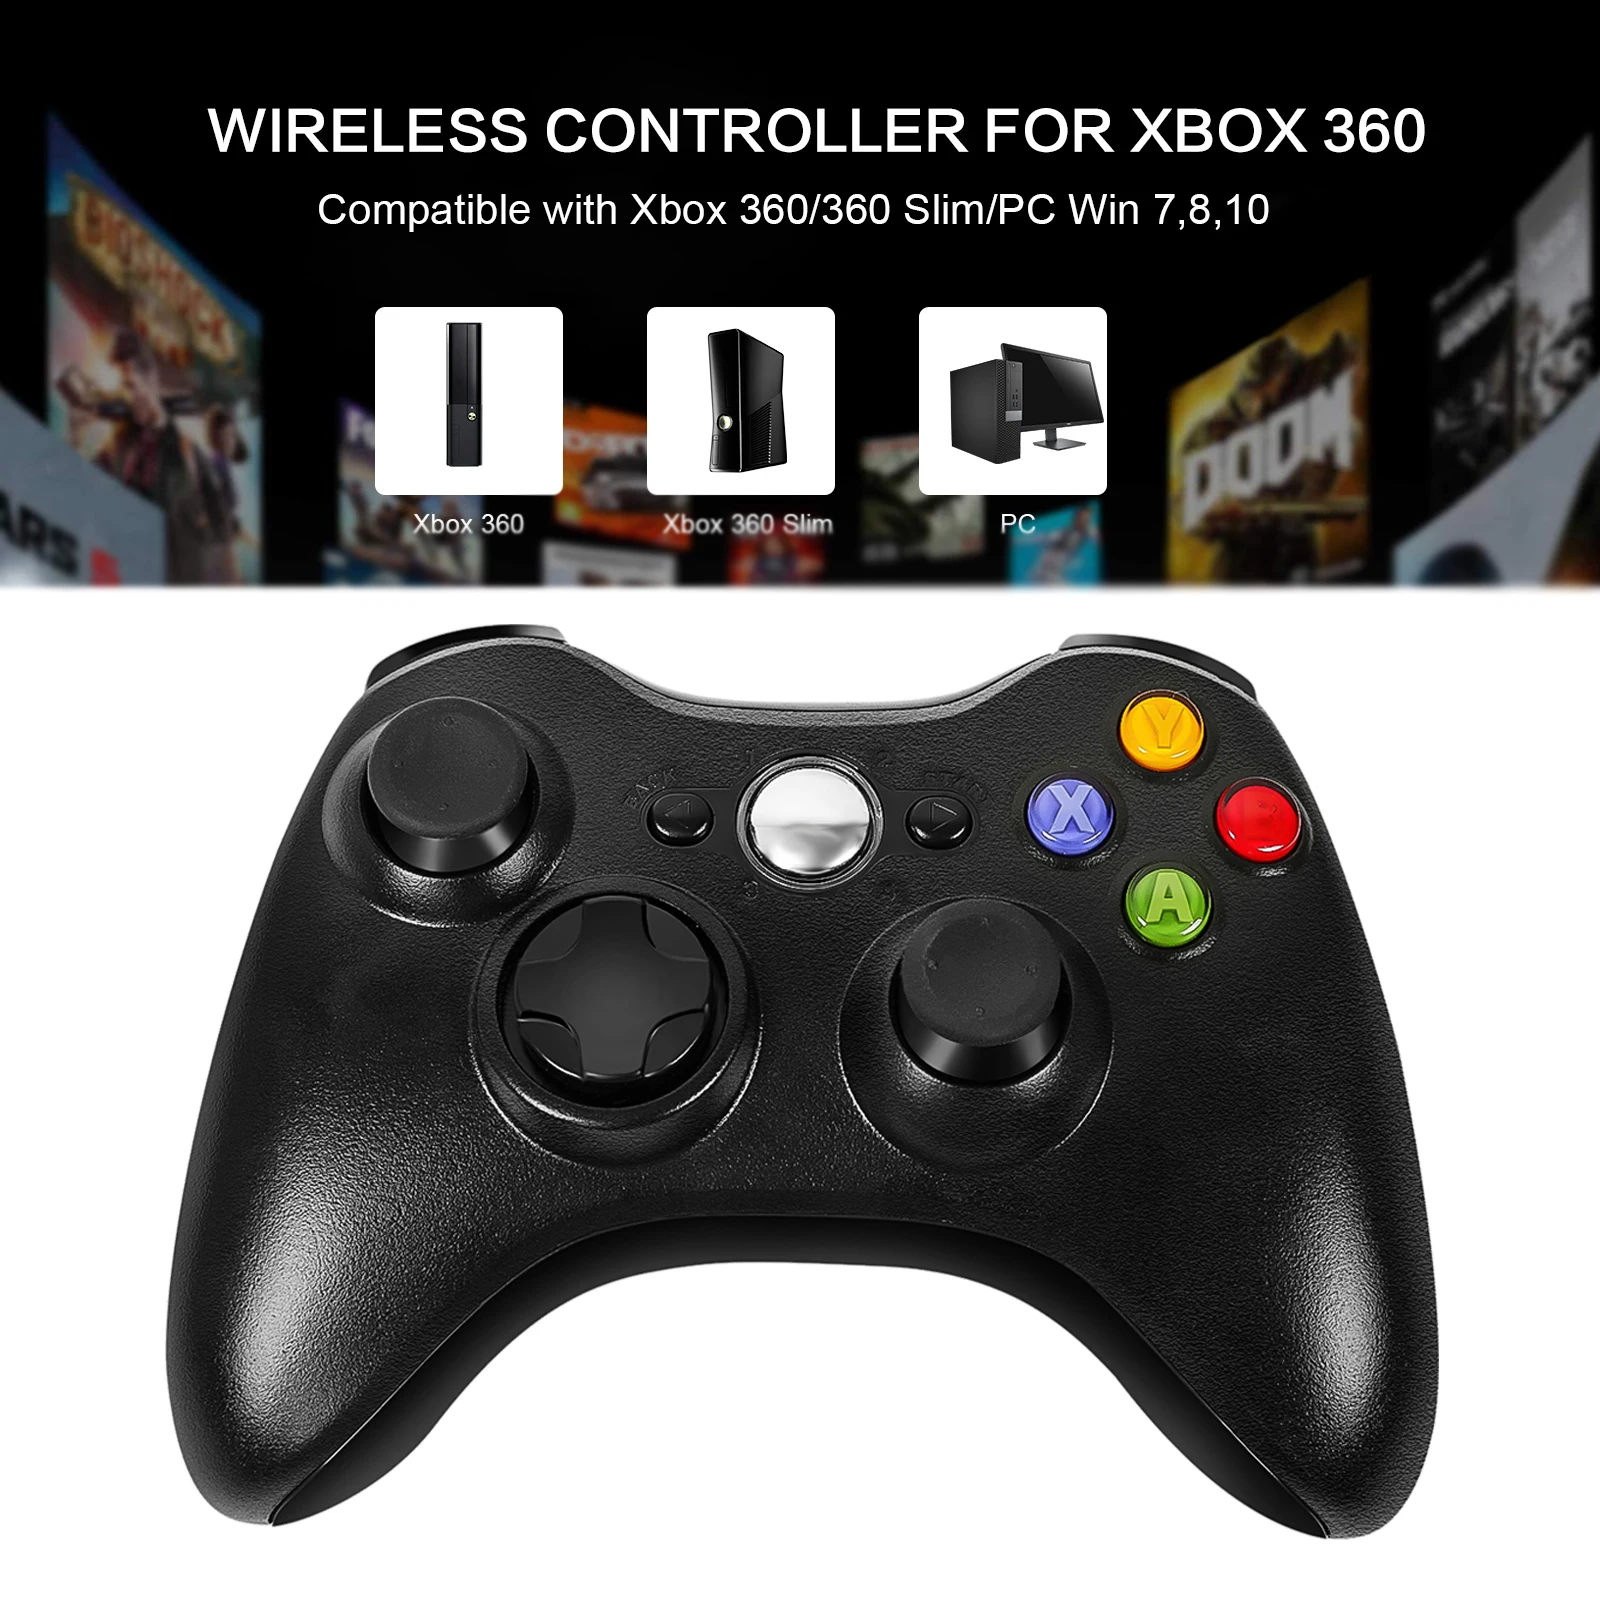 Gamepad For Xbox 360 Wireless/Wired Controller For XBOX 360 Controle Wireless  Joystick For XBOX360 Game Controller Joypad|Gamepads| - AliExpress